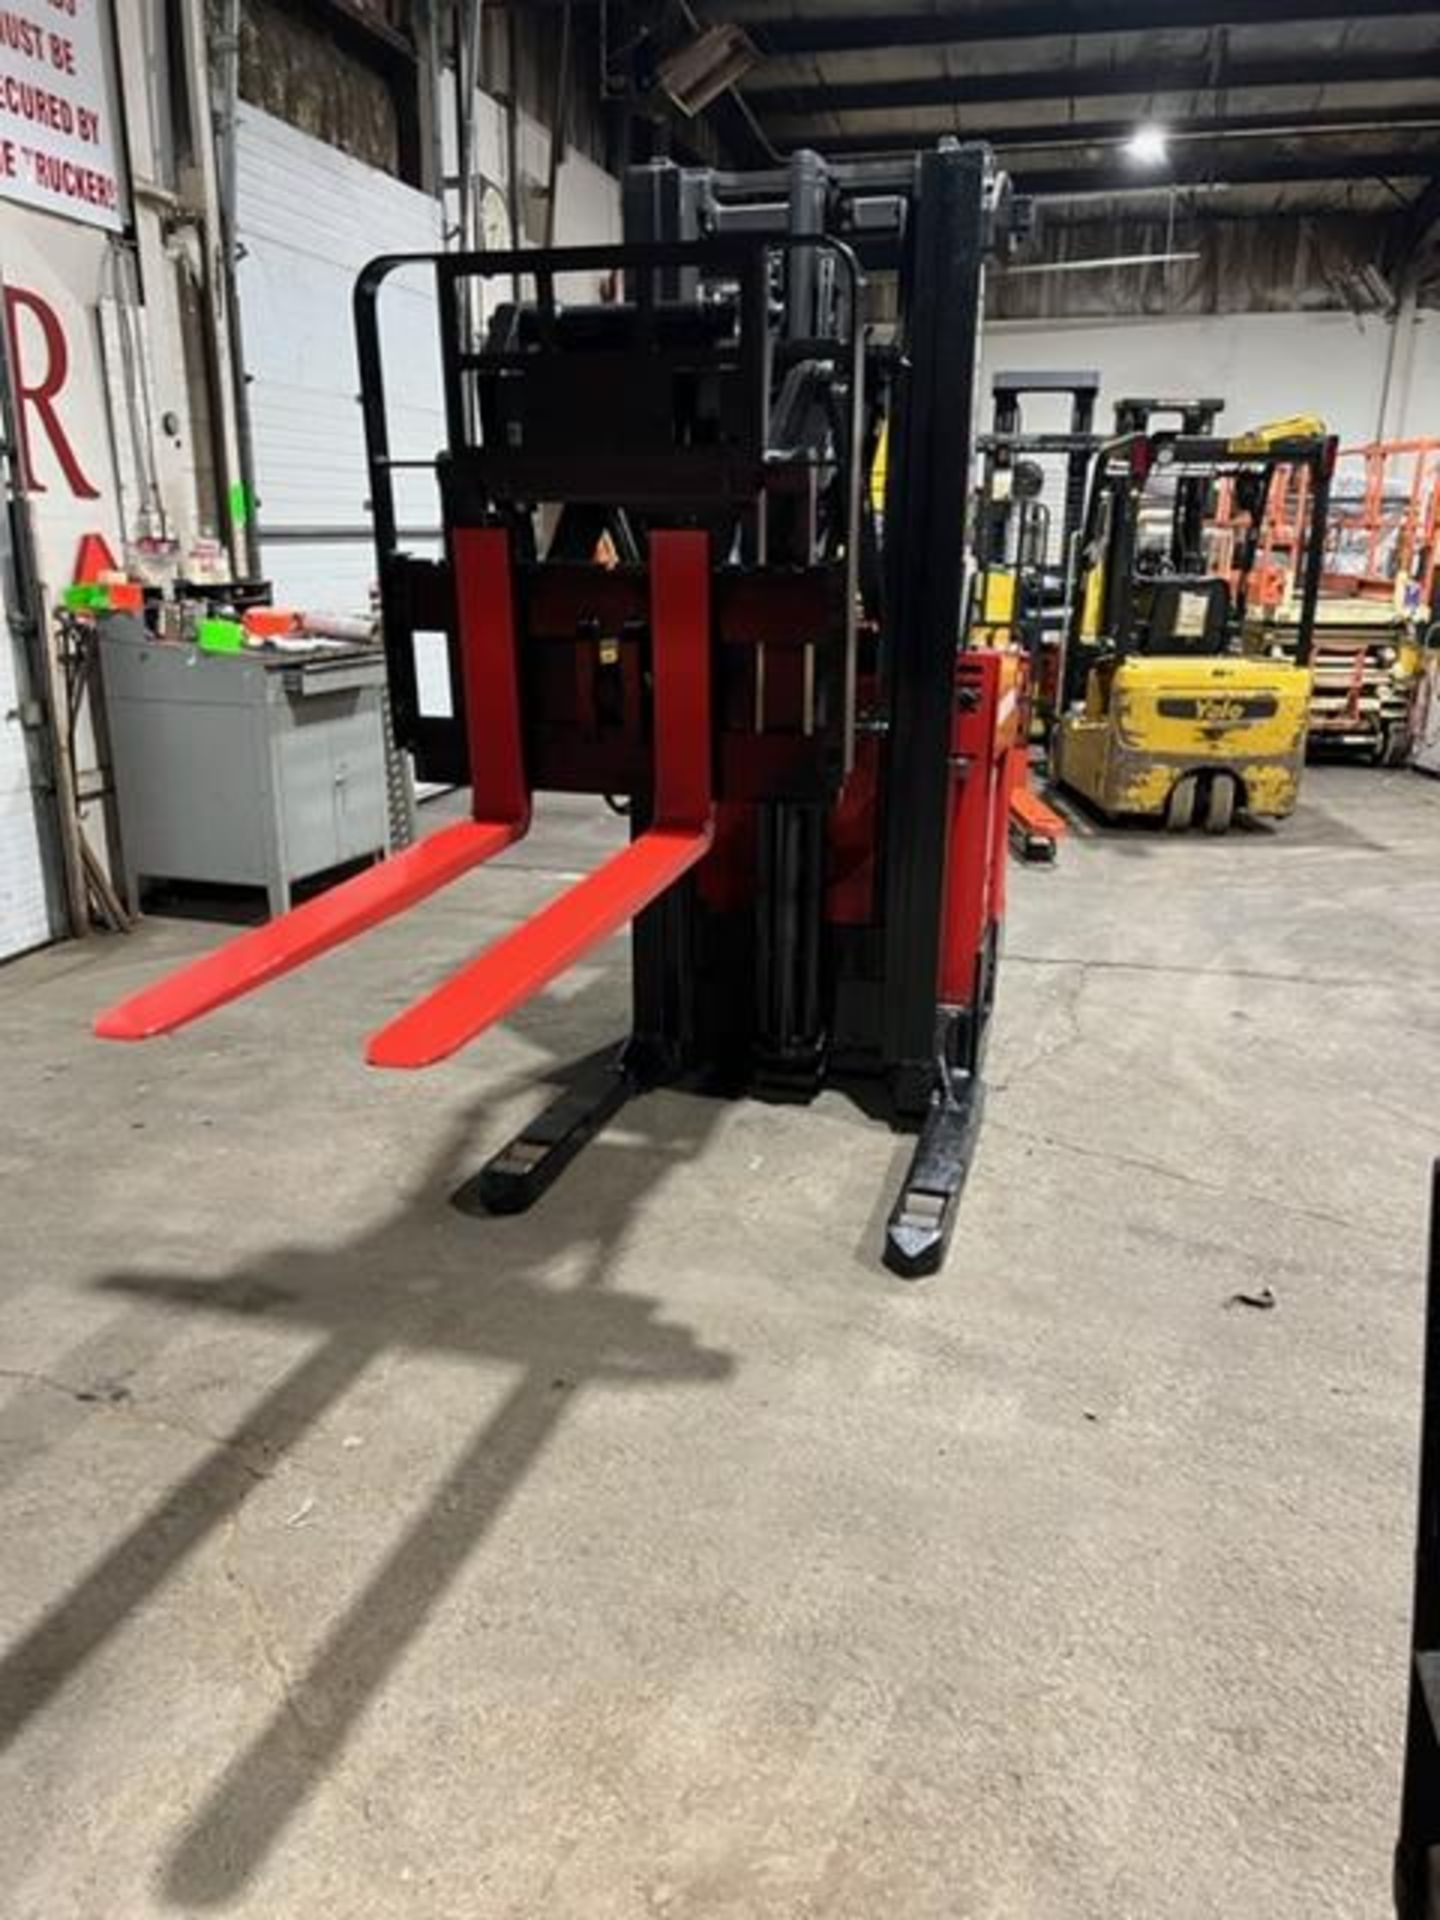 FREE CUSTOMS - NICE Raymond Reach EXTRA REACH Truck 2500lbs Capacity Pallet Lifter with VERY LOW - Image 2 of 3